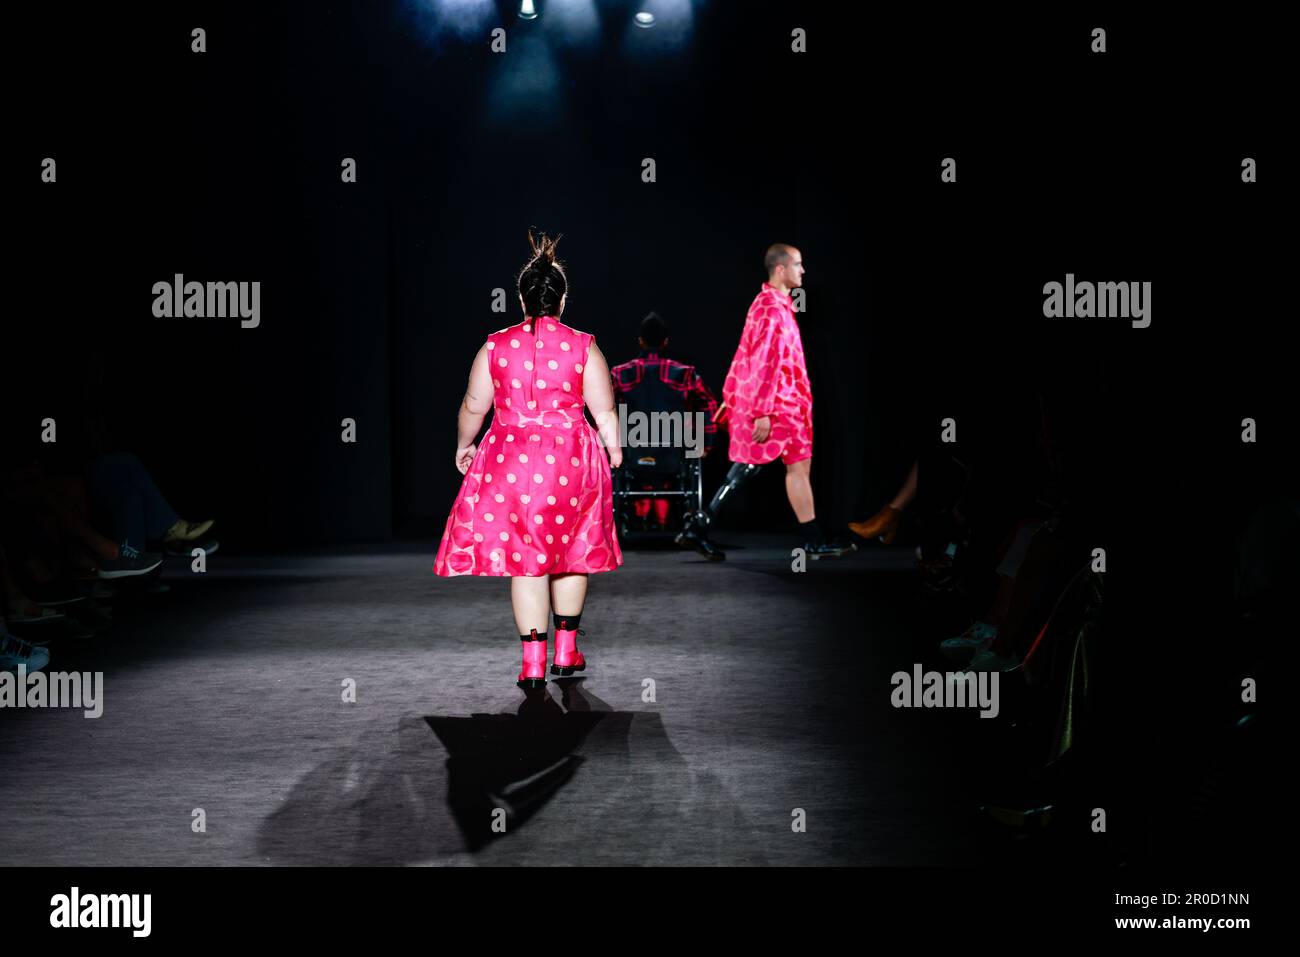 080 FREE FROM STYLE catwalk Stock Photo